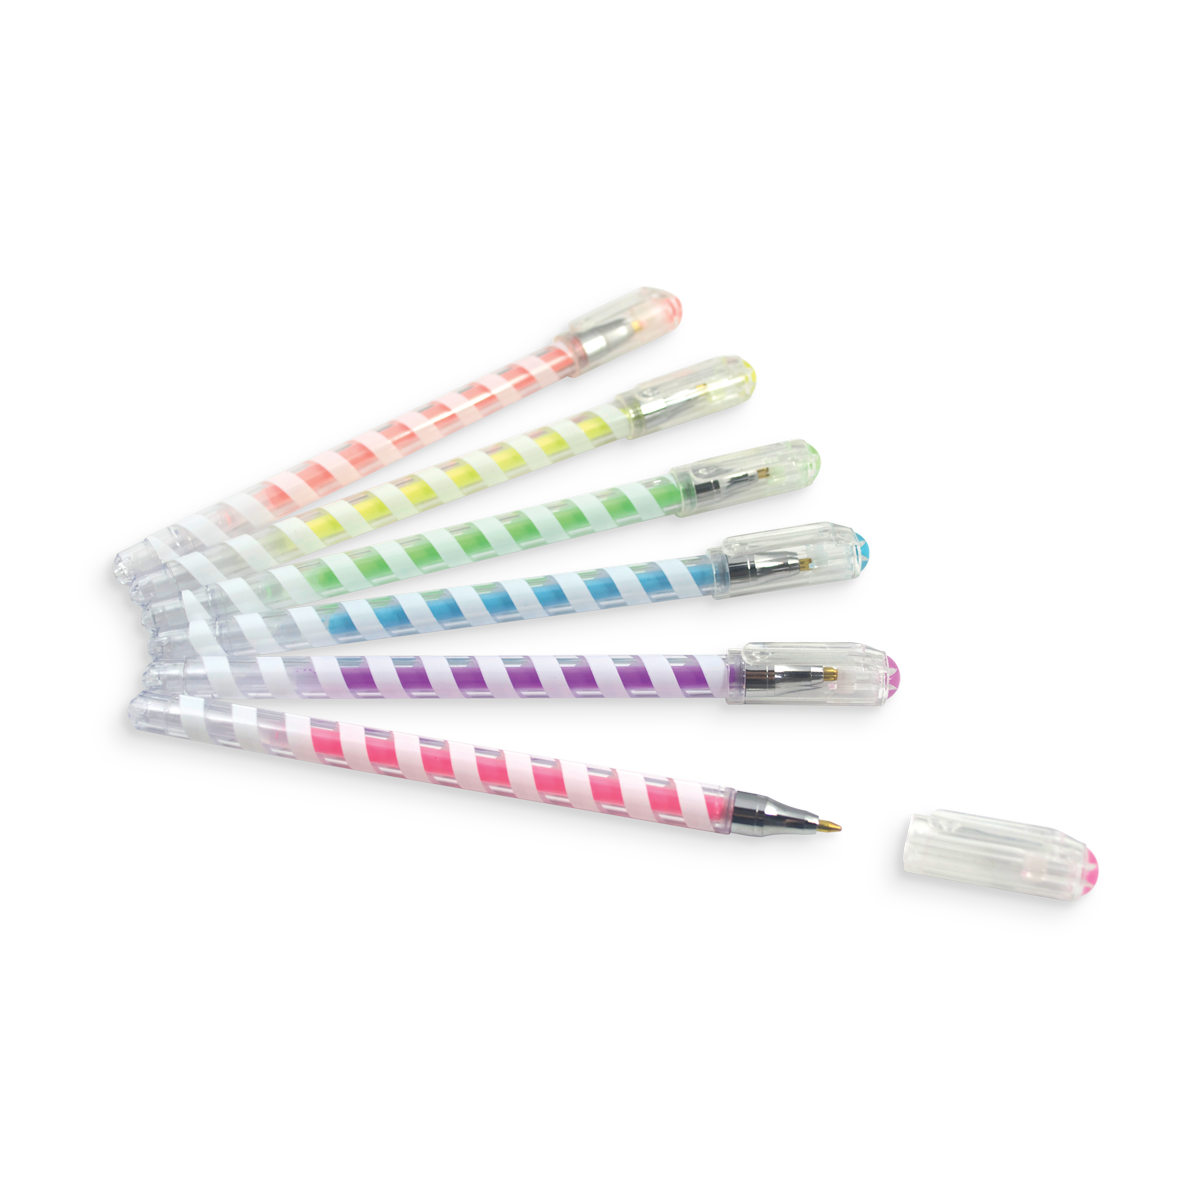 Oh My Glitter! Retractable Gel Pens - Set of 12 - OOLY - Where'd